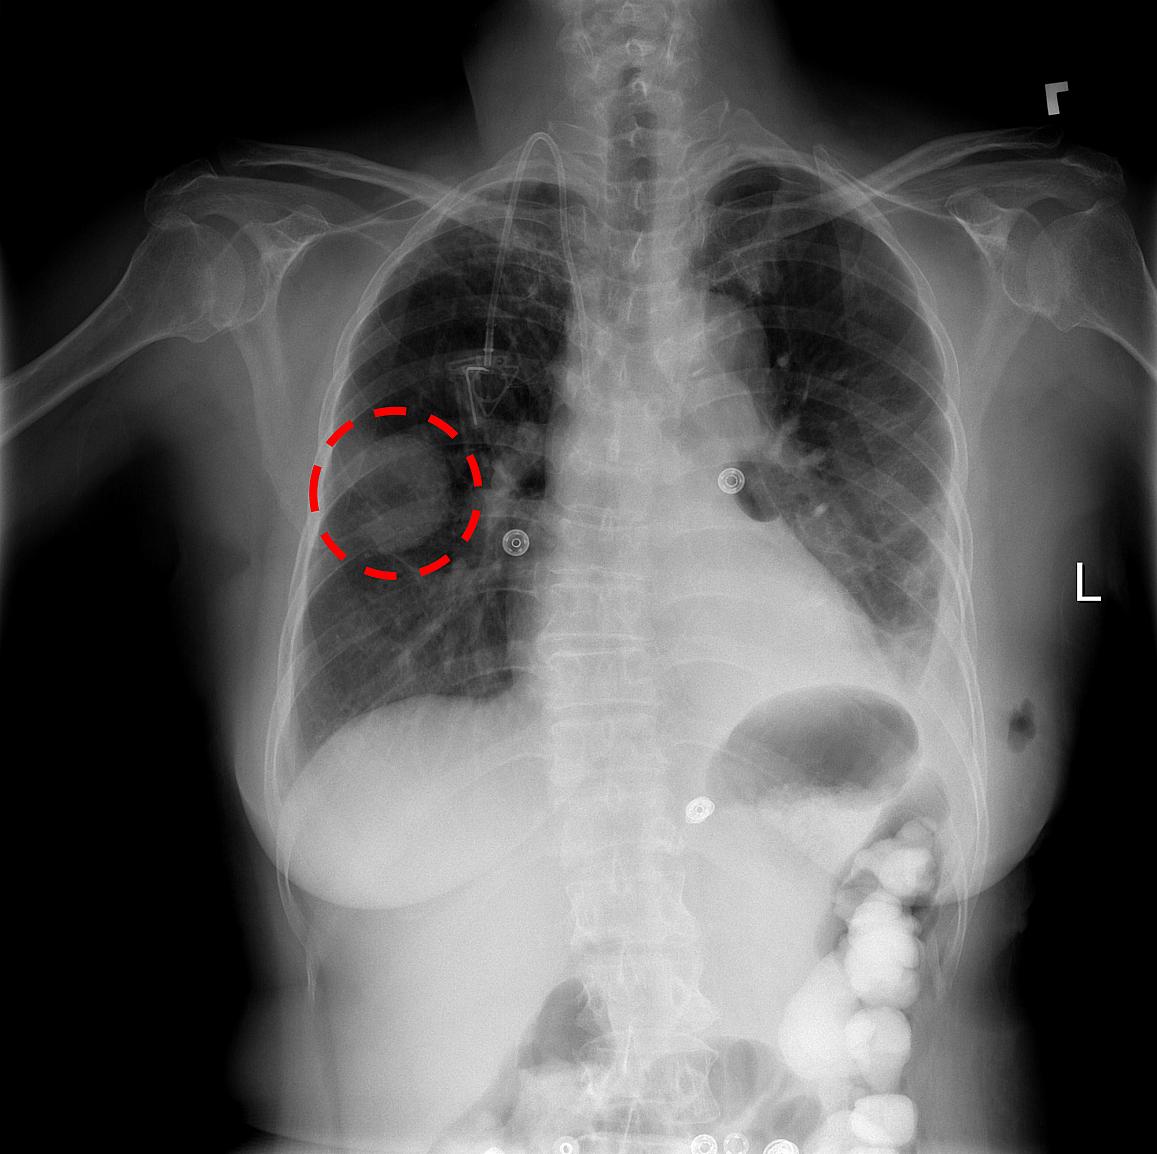 A chest x-ray identifies a lung mass.